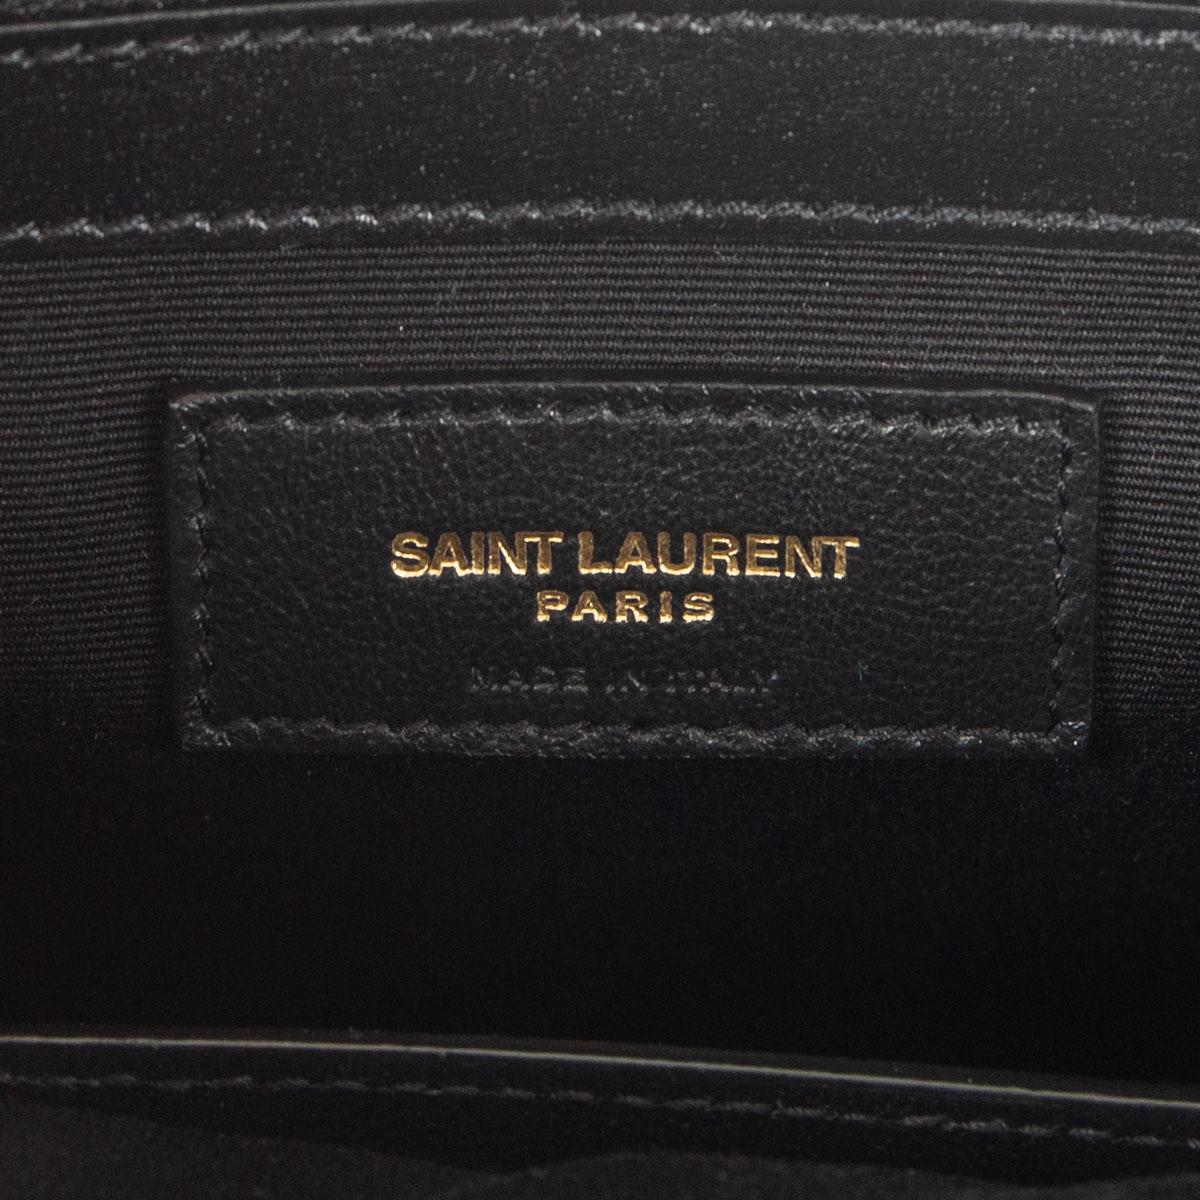 SAINT LAURENT black leather MANHATTAN SMALL SHOPPING Tote Bag at ...